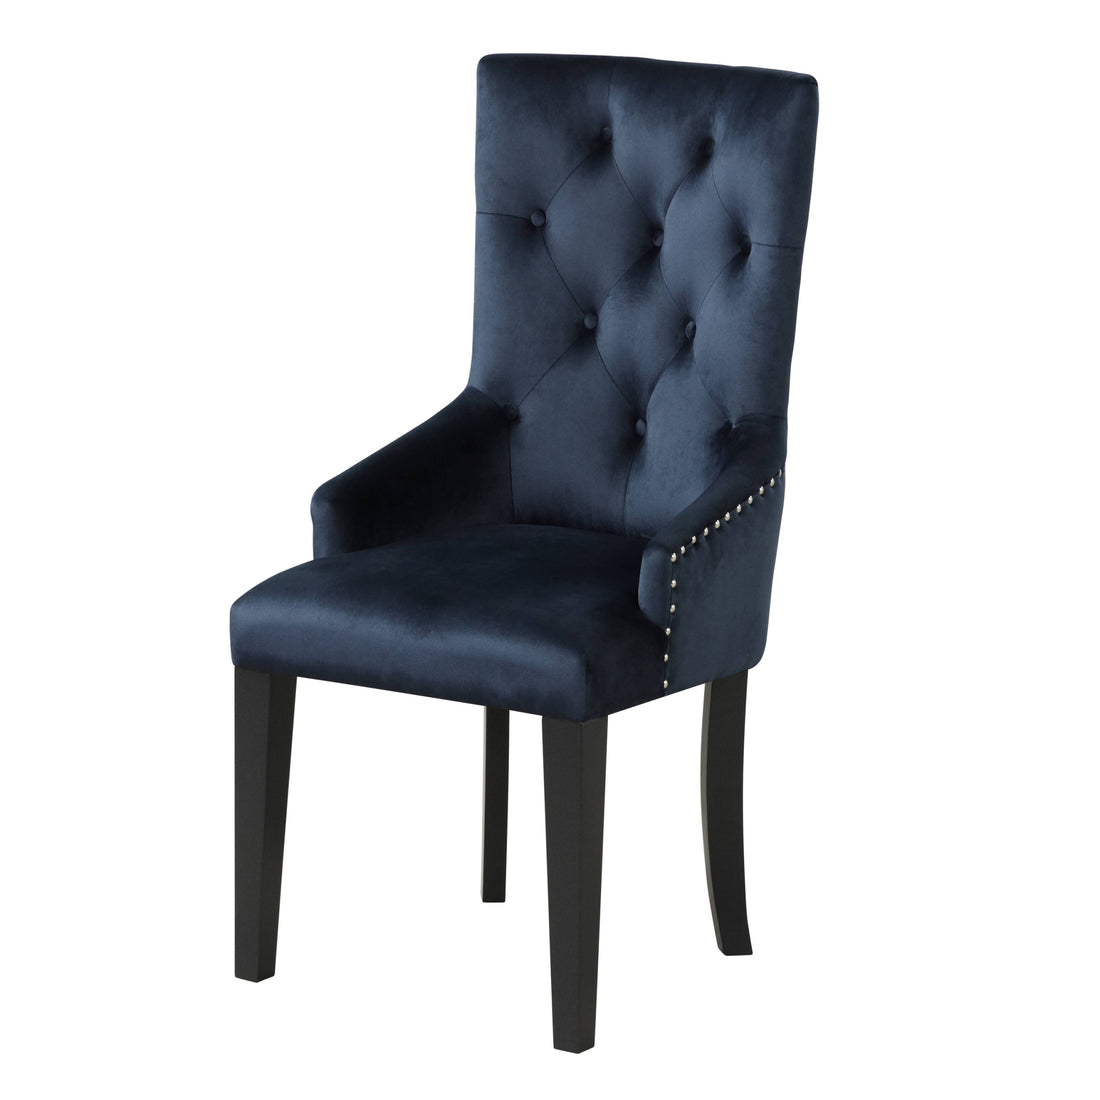 Dark Navy And Black Tufted Back Arm Chair - Solid